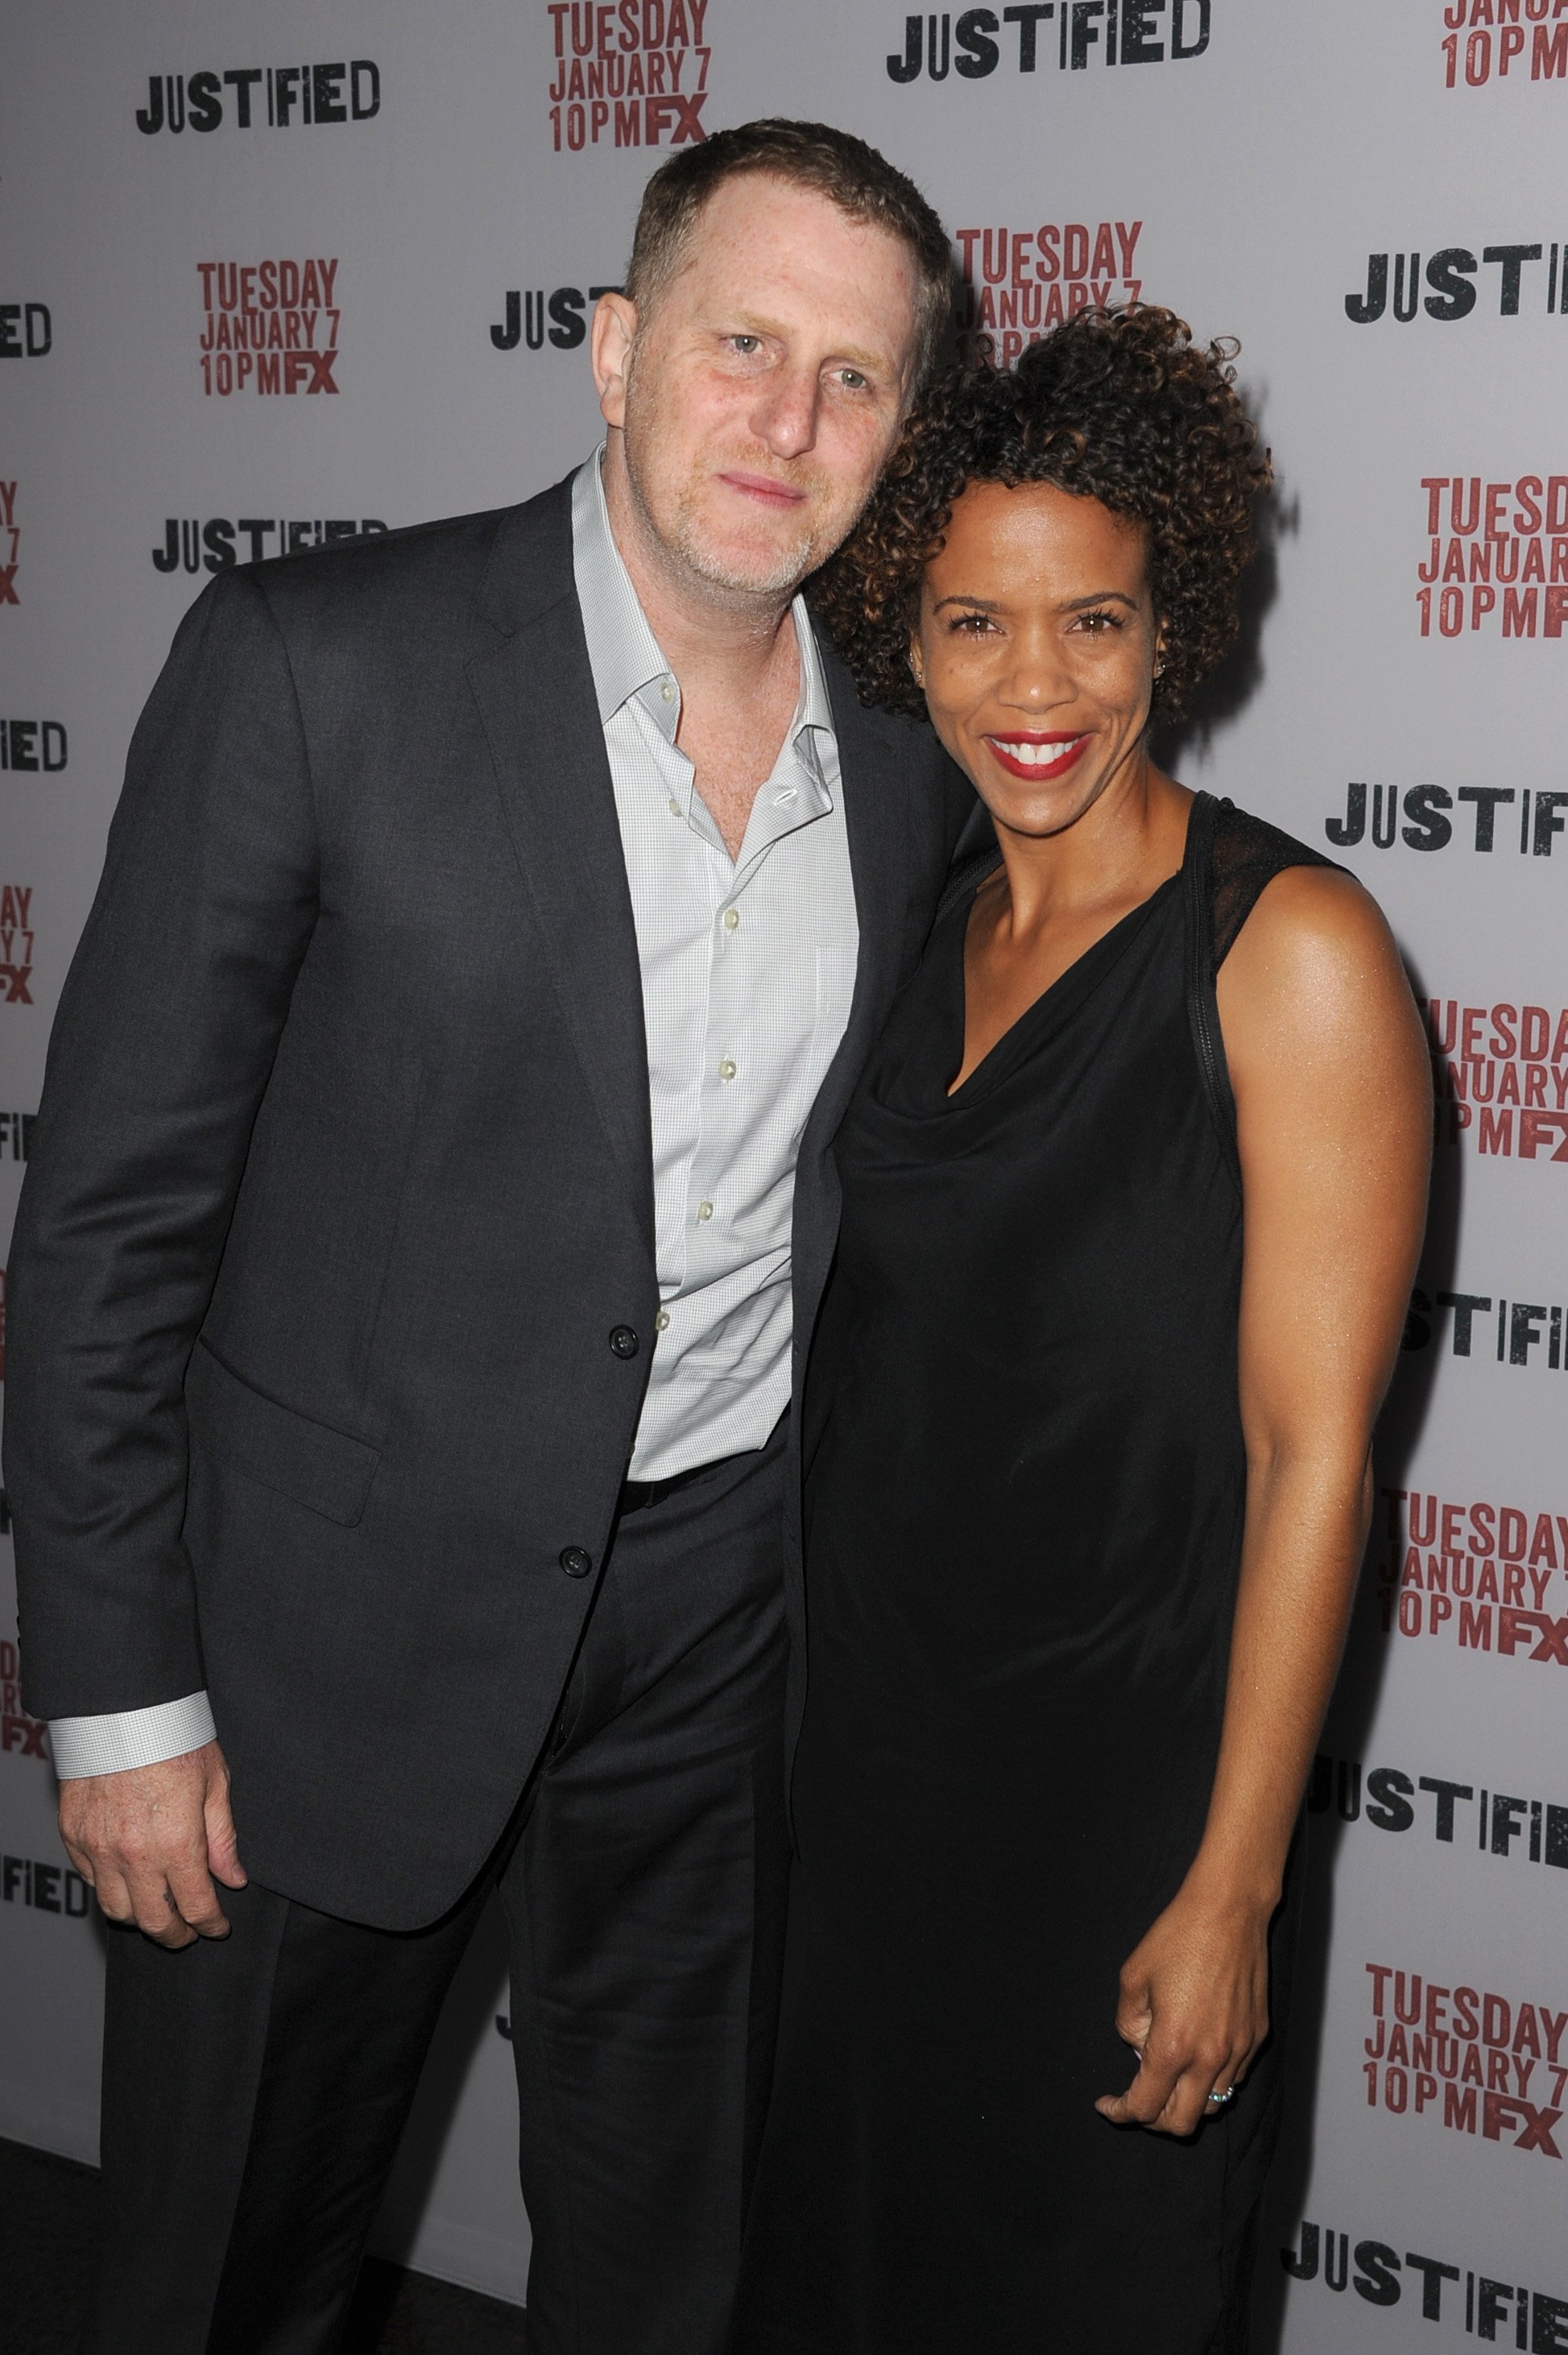 Michael Rapaport and Kebe Dunn pose at the season 5 premiere screening of FX's "Justified" at the DGA Theater on January 6, 2014, in Los Angeles, California | Source: Getty Images